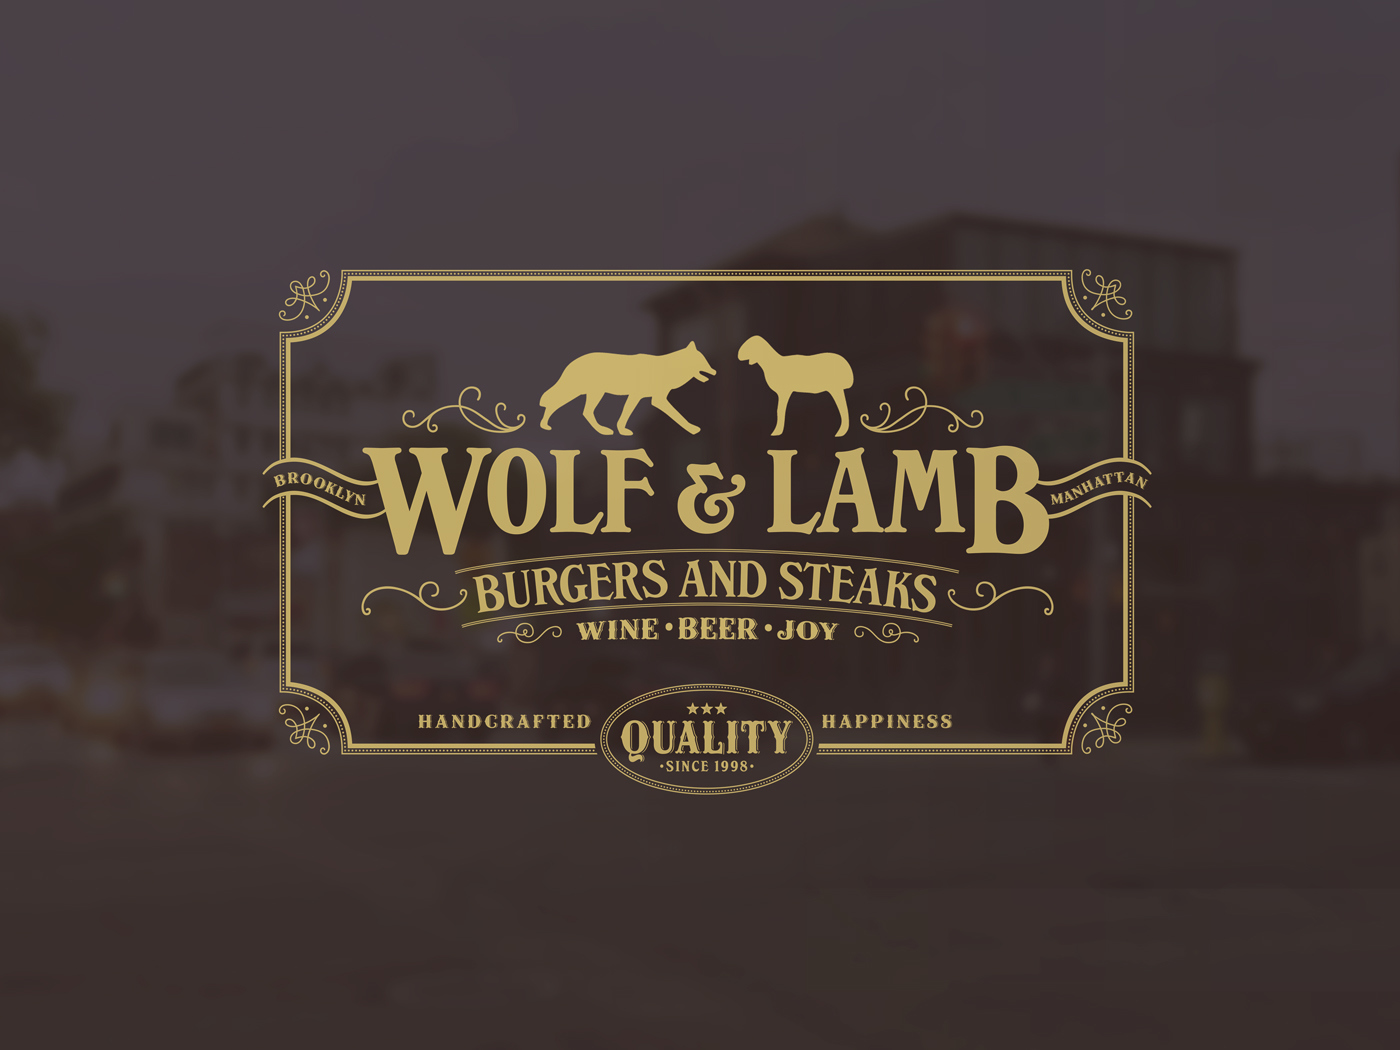 Wolf & Lamb In Brooklyn Will Not Be Reopening